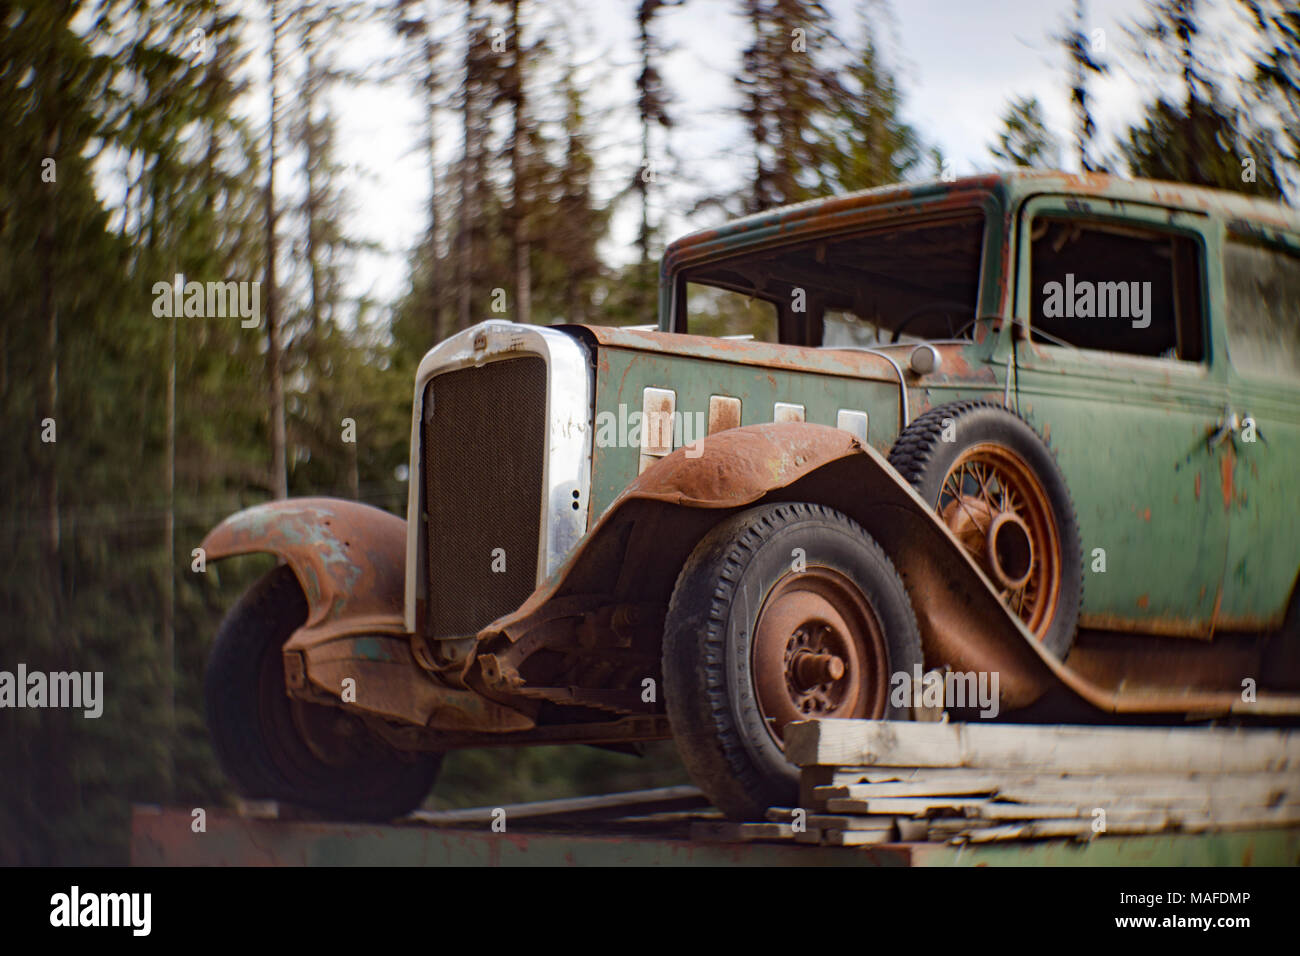 A green 1932 Chevrolet Series BA Confederate 4-door sedan in an old stone quarry, east of Clark Fork, Idaho. Stock Photo